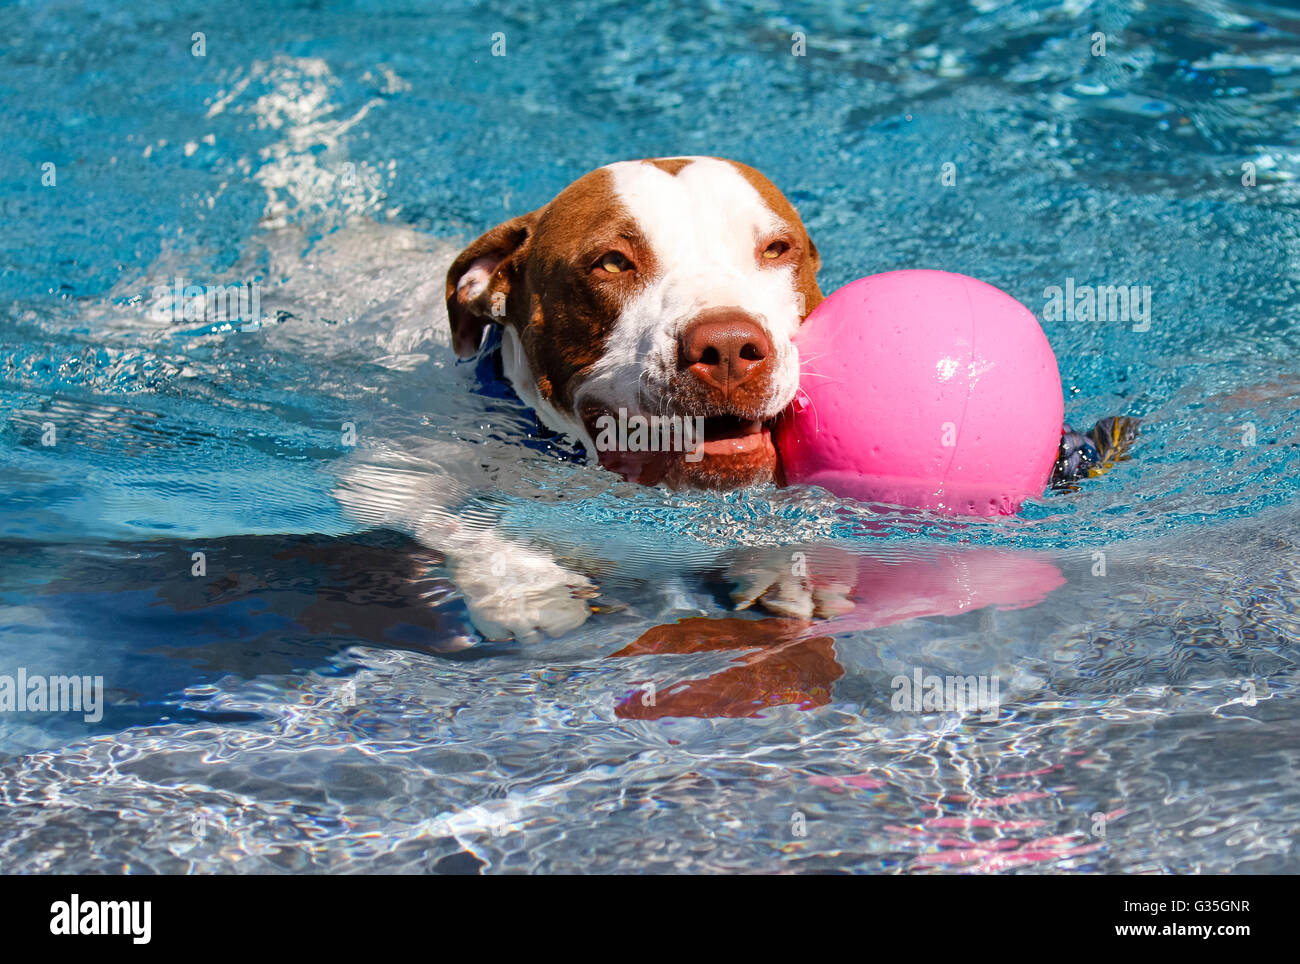 Dog with a pink ball in the swimming pool Stock Photo